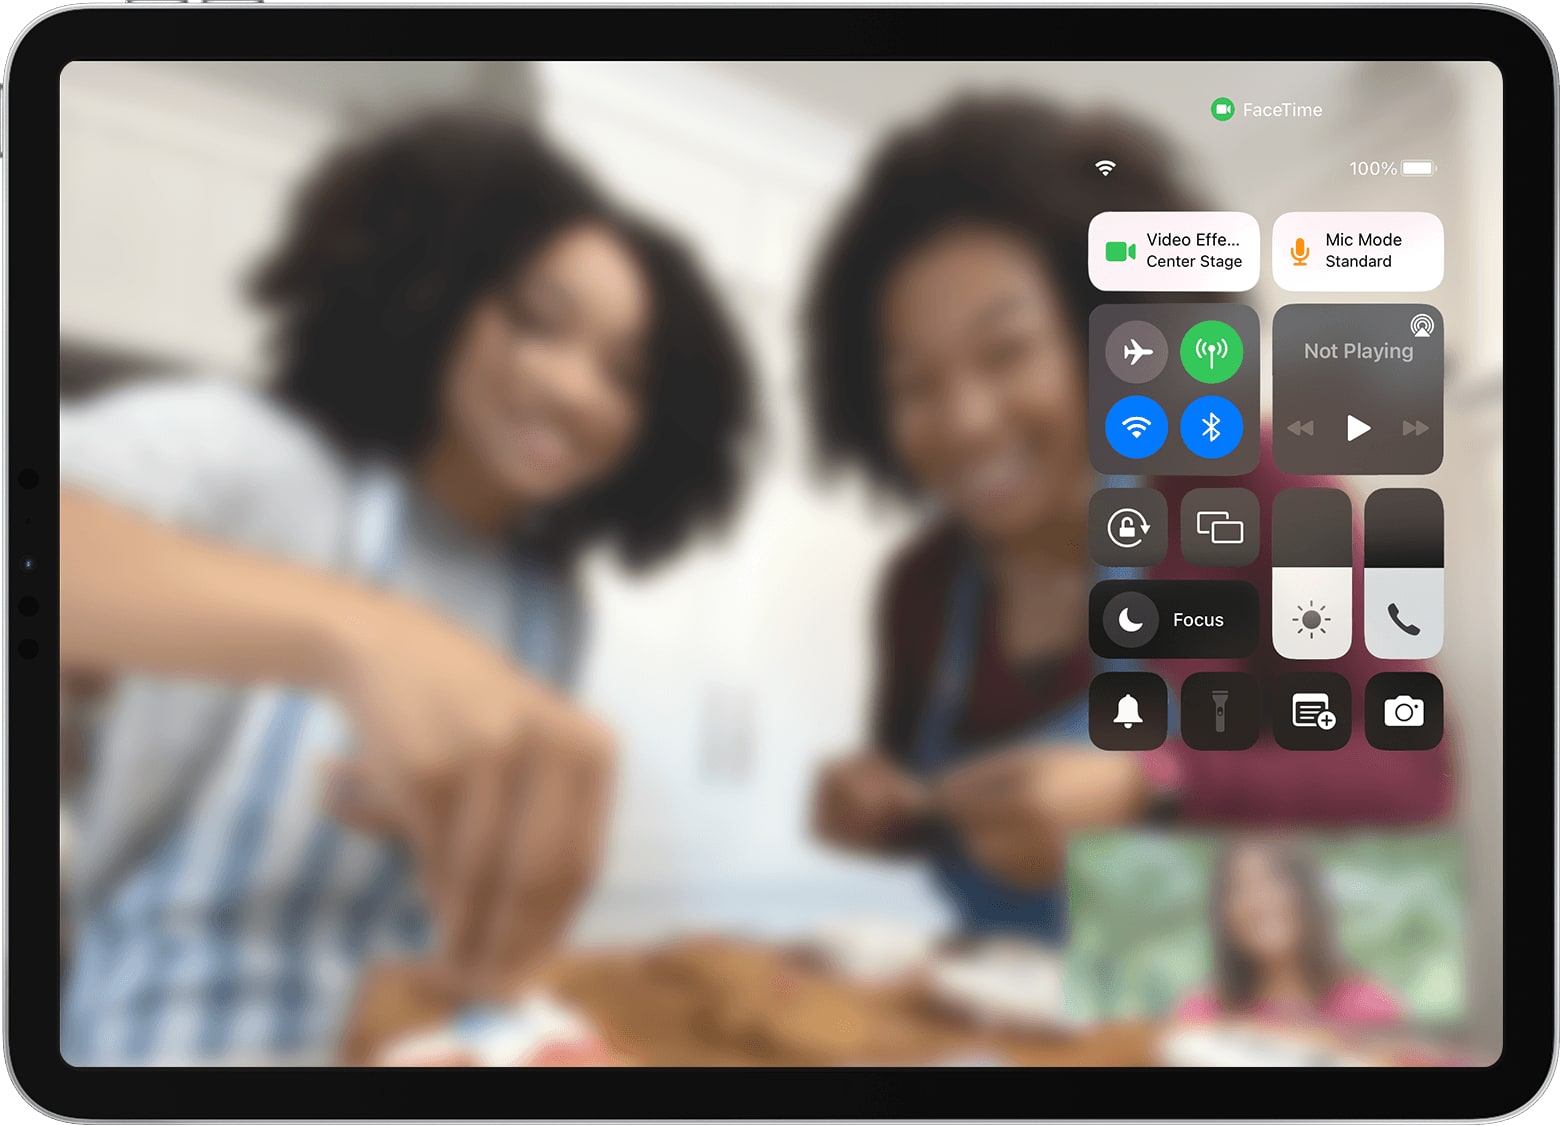 Apple's marketing image showing the iOS 15 Control Center overlay on iPad Pro with the Center Stage camera feature turned on, and a blurred FaceTime video call in the background 